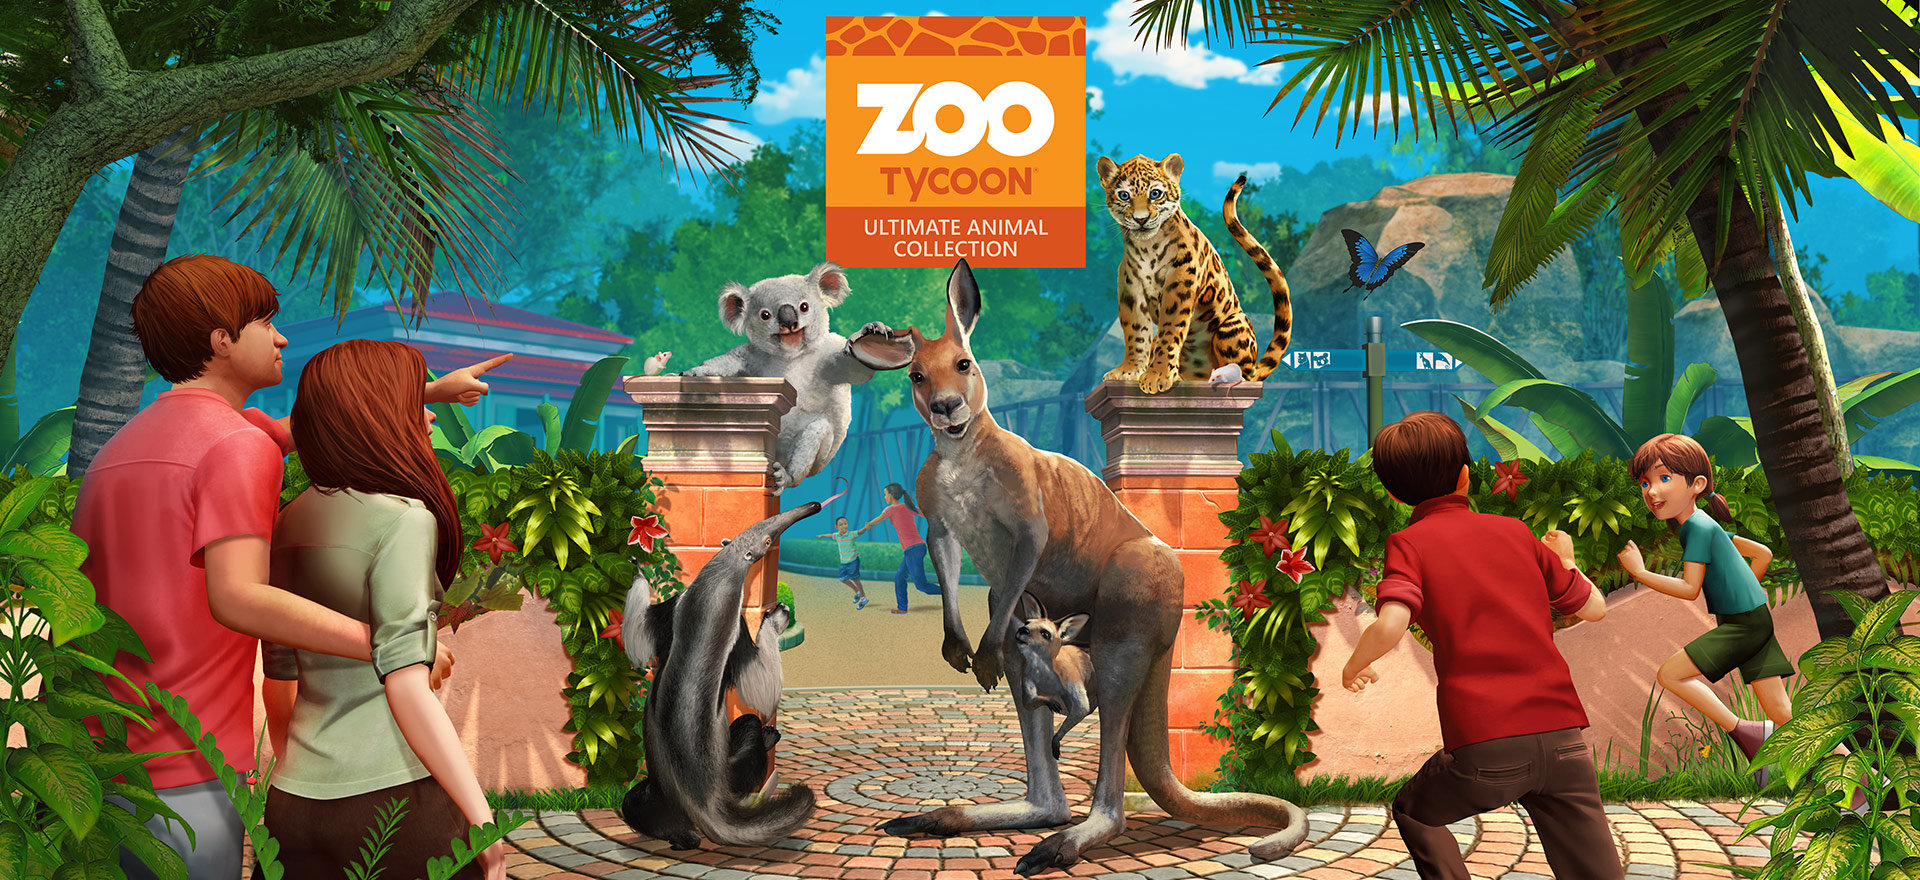 play zoo tycoon online free download